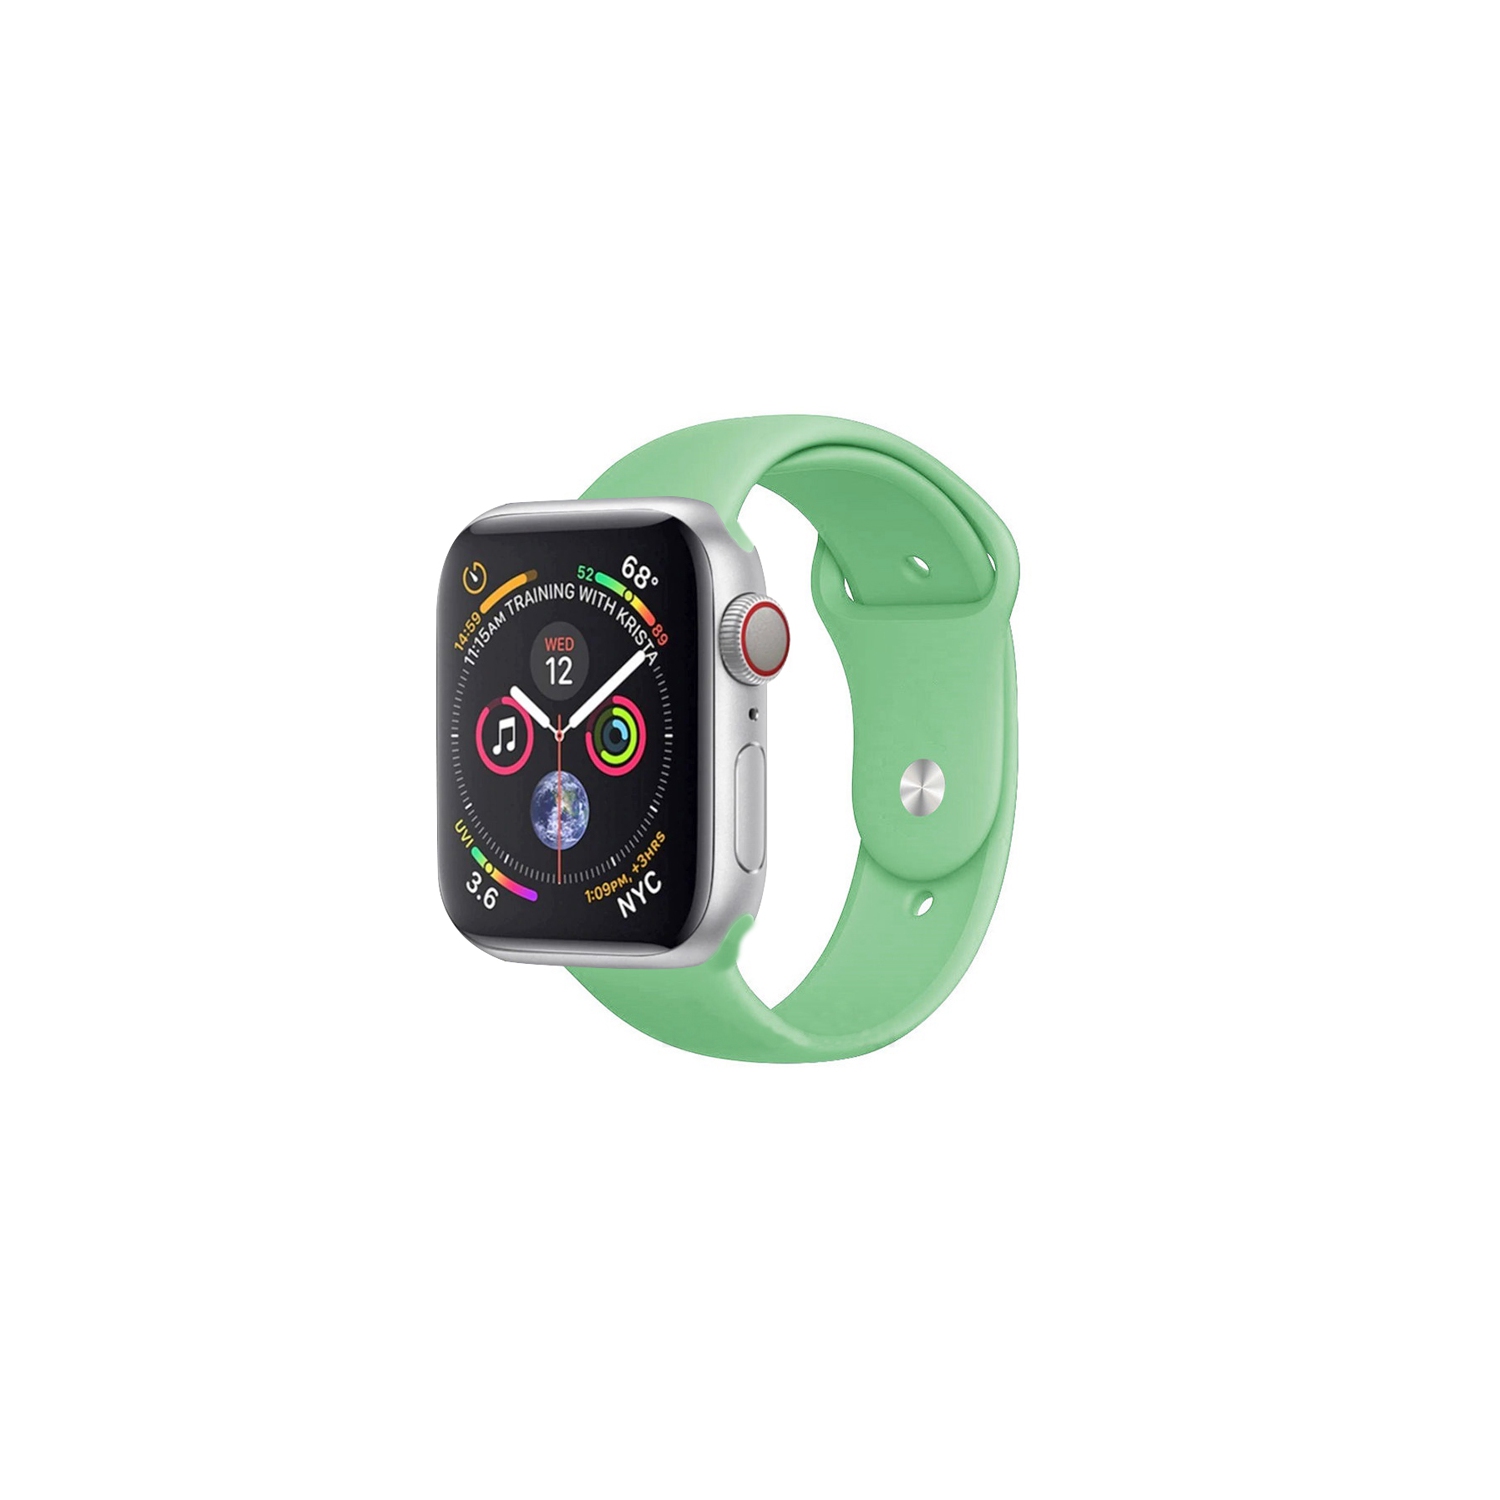 Watch Strap Silicone Sports Band Bracelet M/L Size For Apple iWatch Series 38mm/40mm - Mint Green